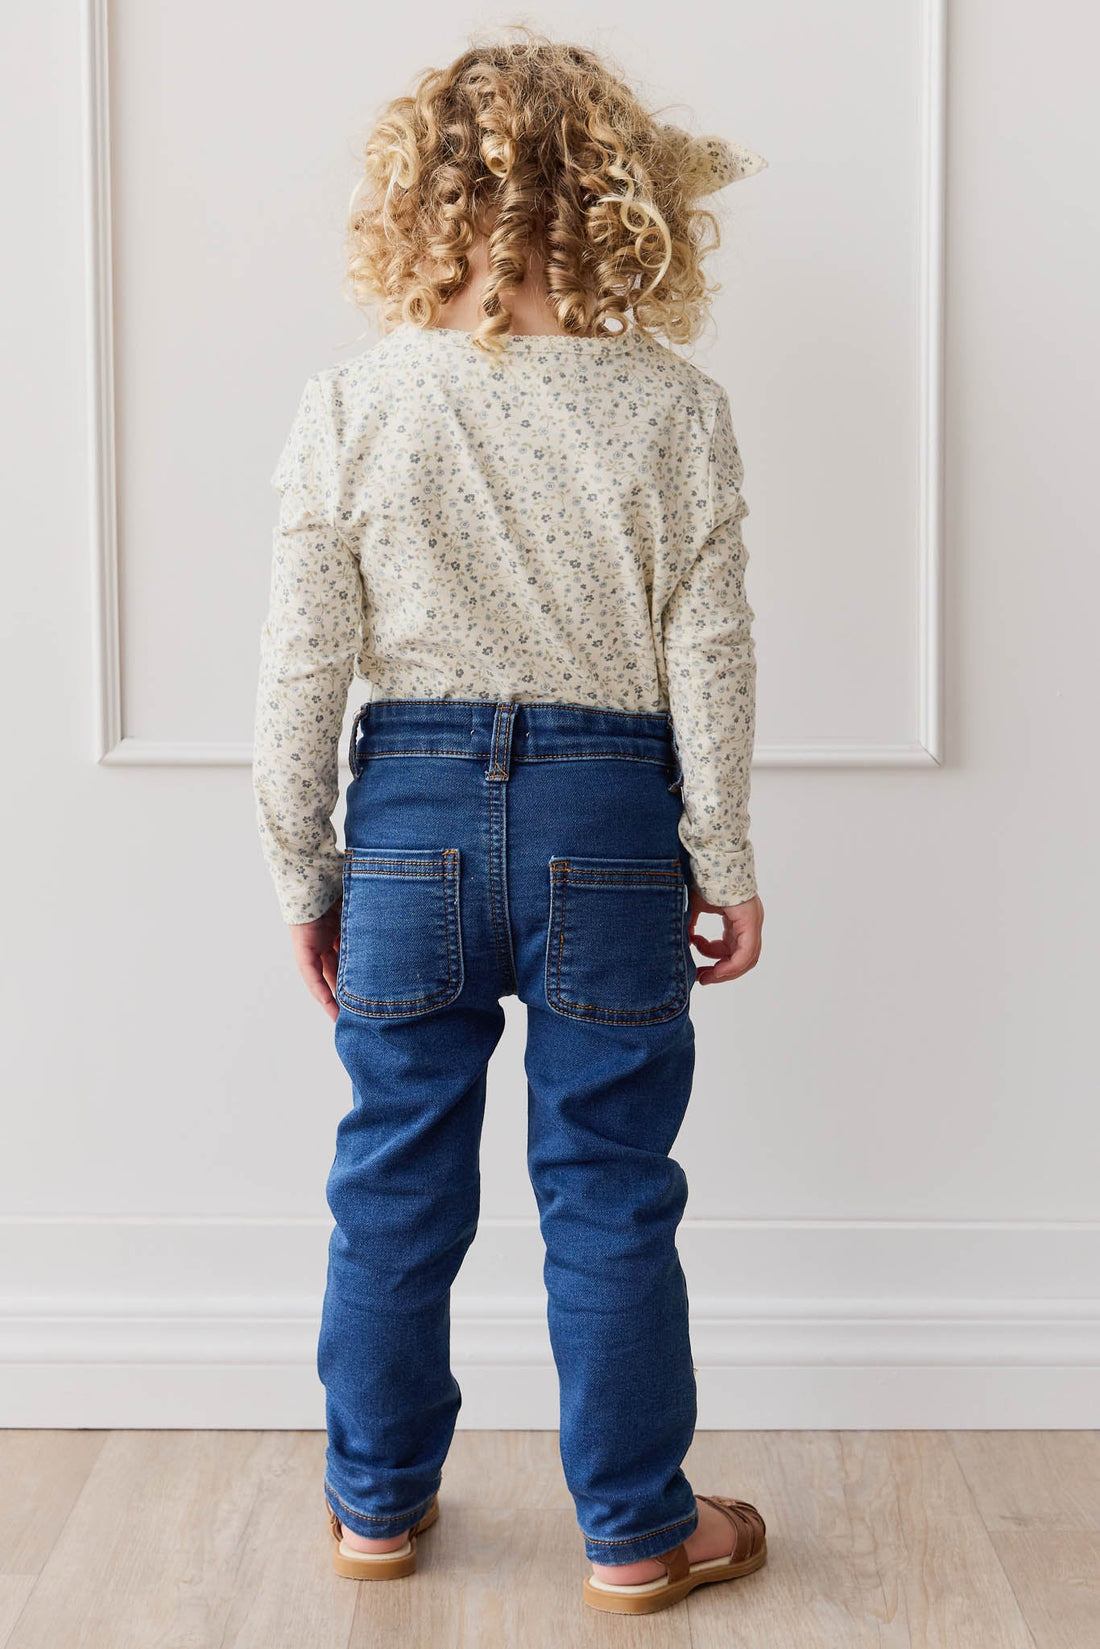 Organic Cotton Long Sleeve Top - Dainty Egret Blues Childrens Top from Jamie Kay USA